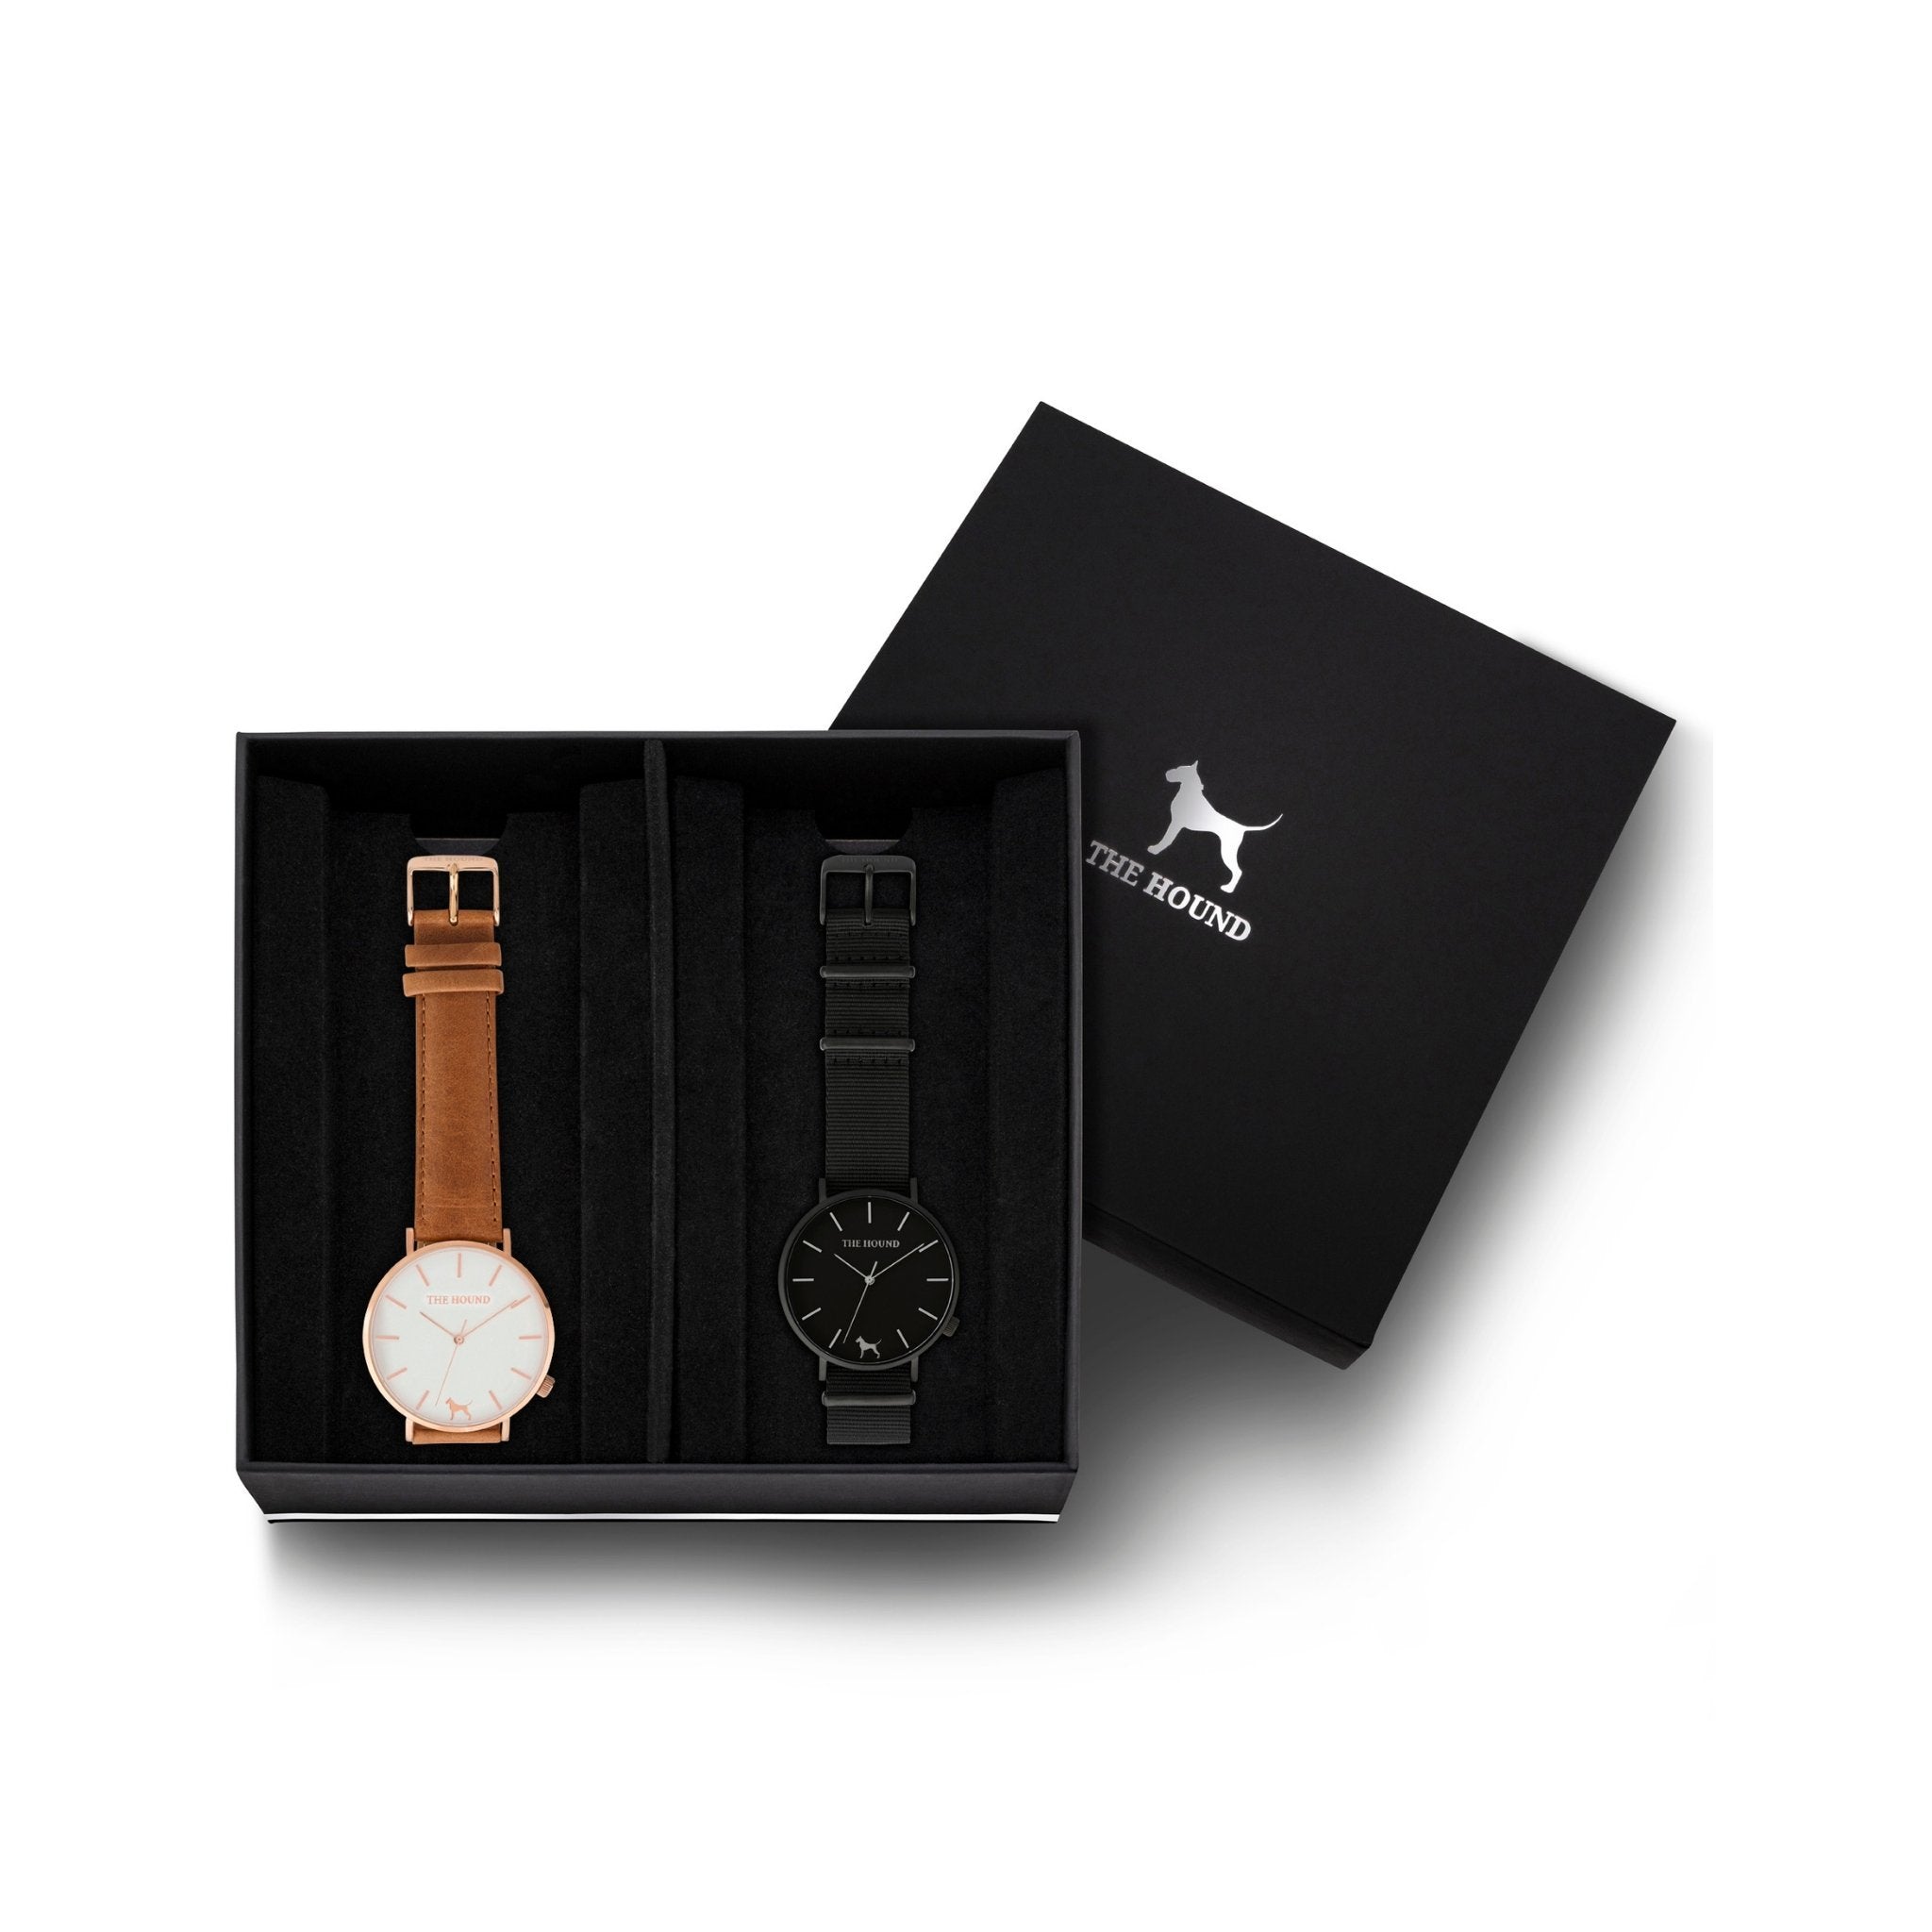 Custom gift set - Rose gold and white watch with stitched tan genuine leather band and a matte black and black watch with black nato leather band